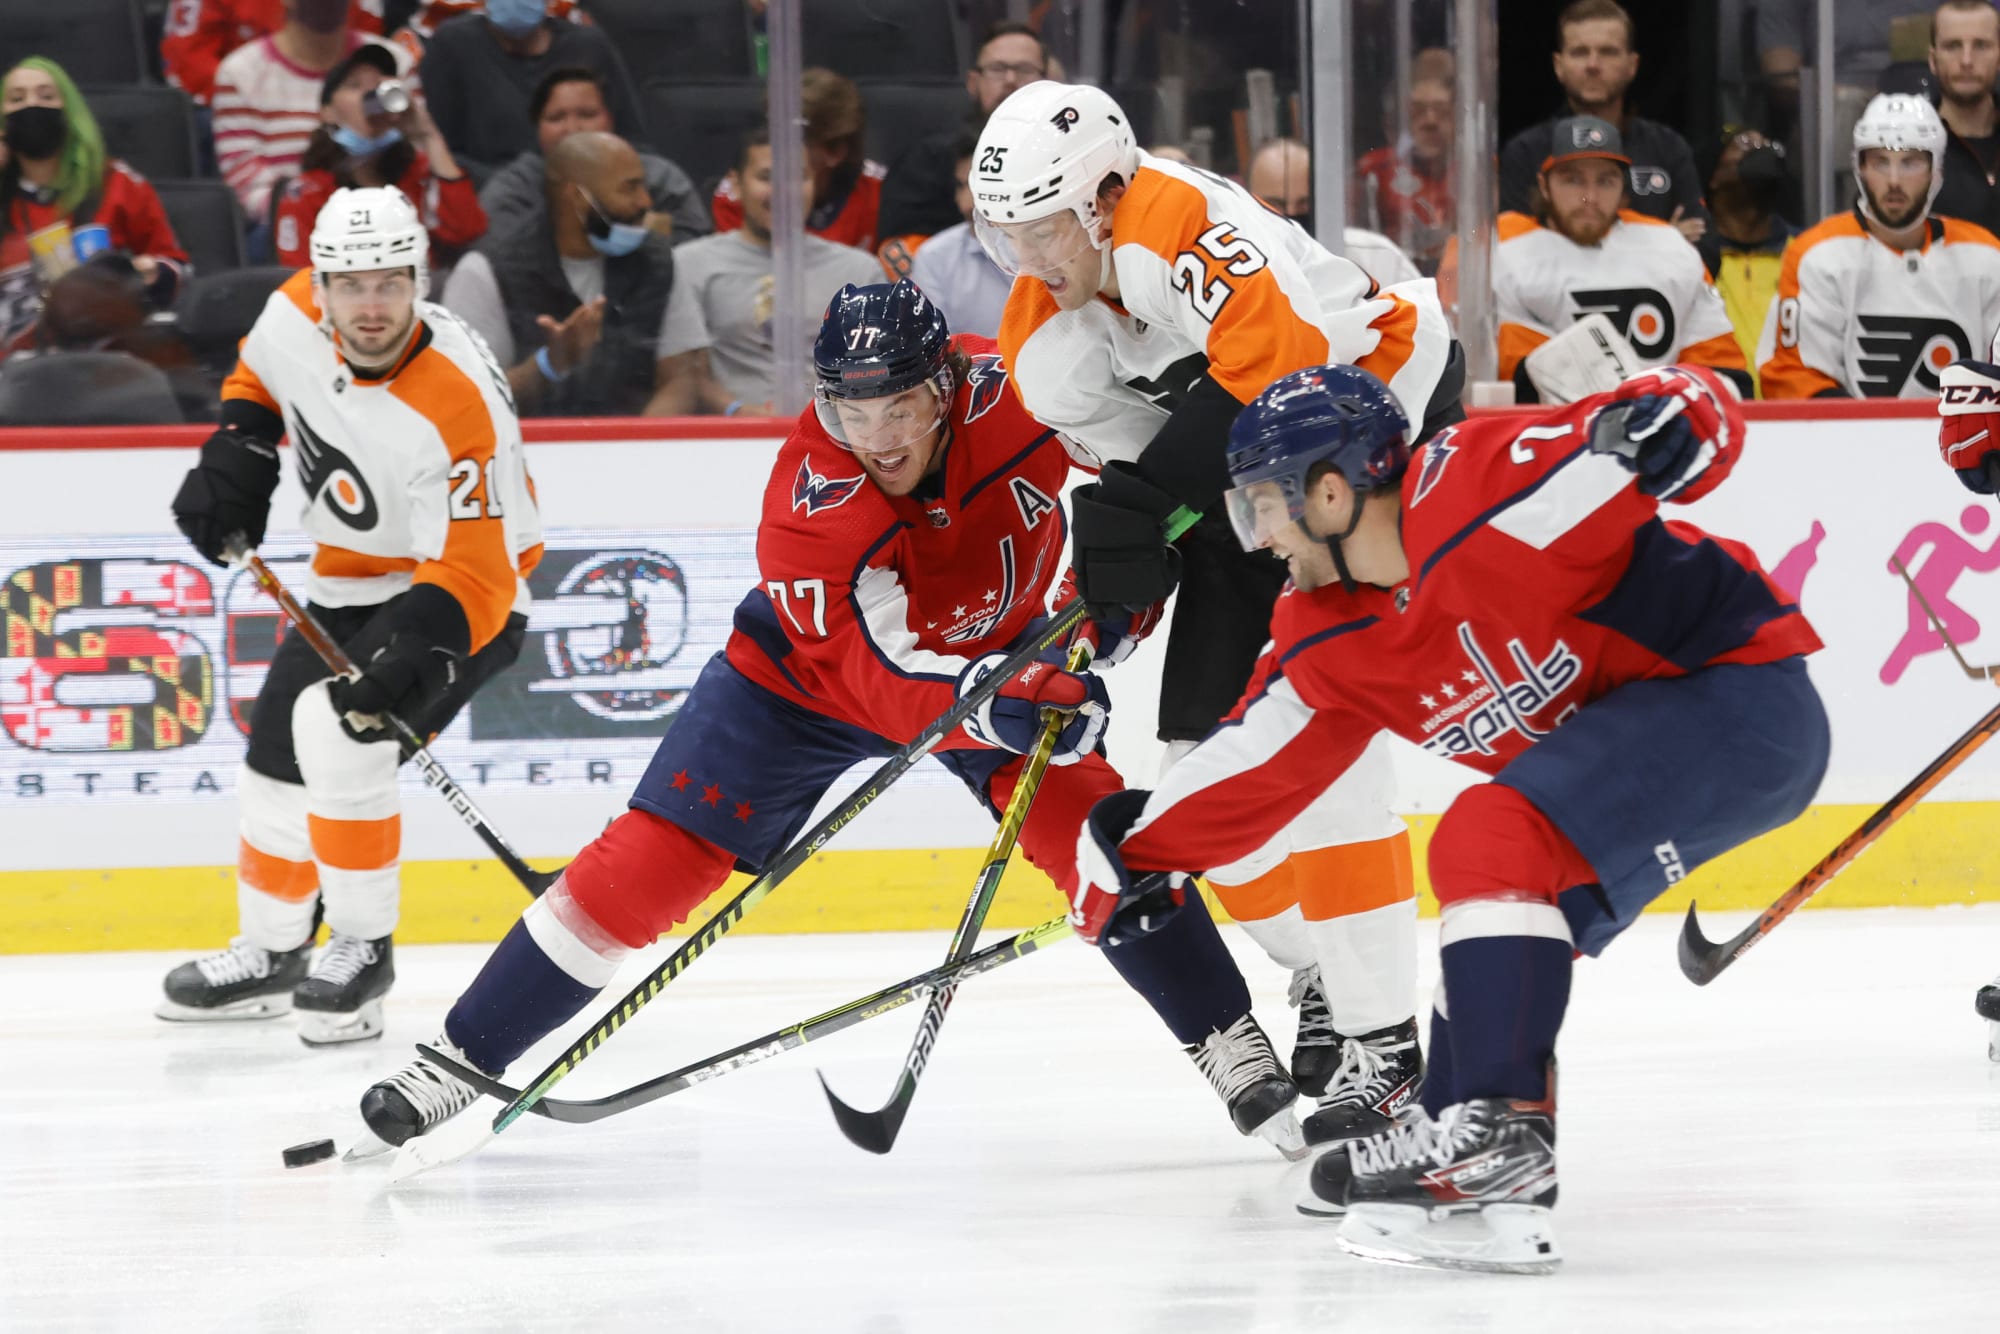 Flyers vs. Capitals: Date, Time, Betting Odds, Streaming, More